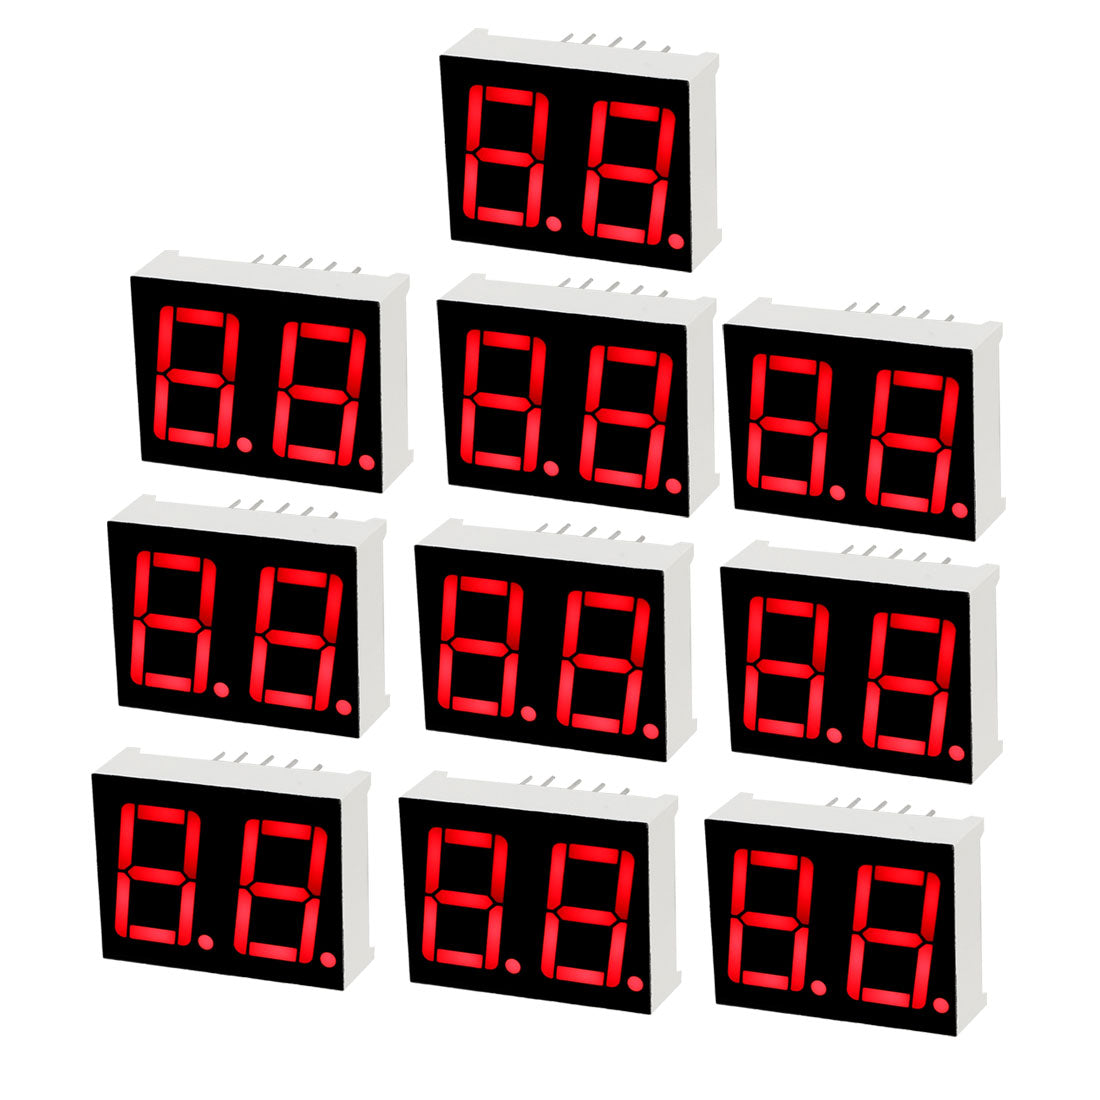 uxcell Uxcell Common Cathode 10 Pin 2 Bit 7 Segment 0.98 x 0.75 x 0.31 Inch 0.55 Inch Red LED Display Digital Tube 10pcs